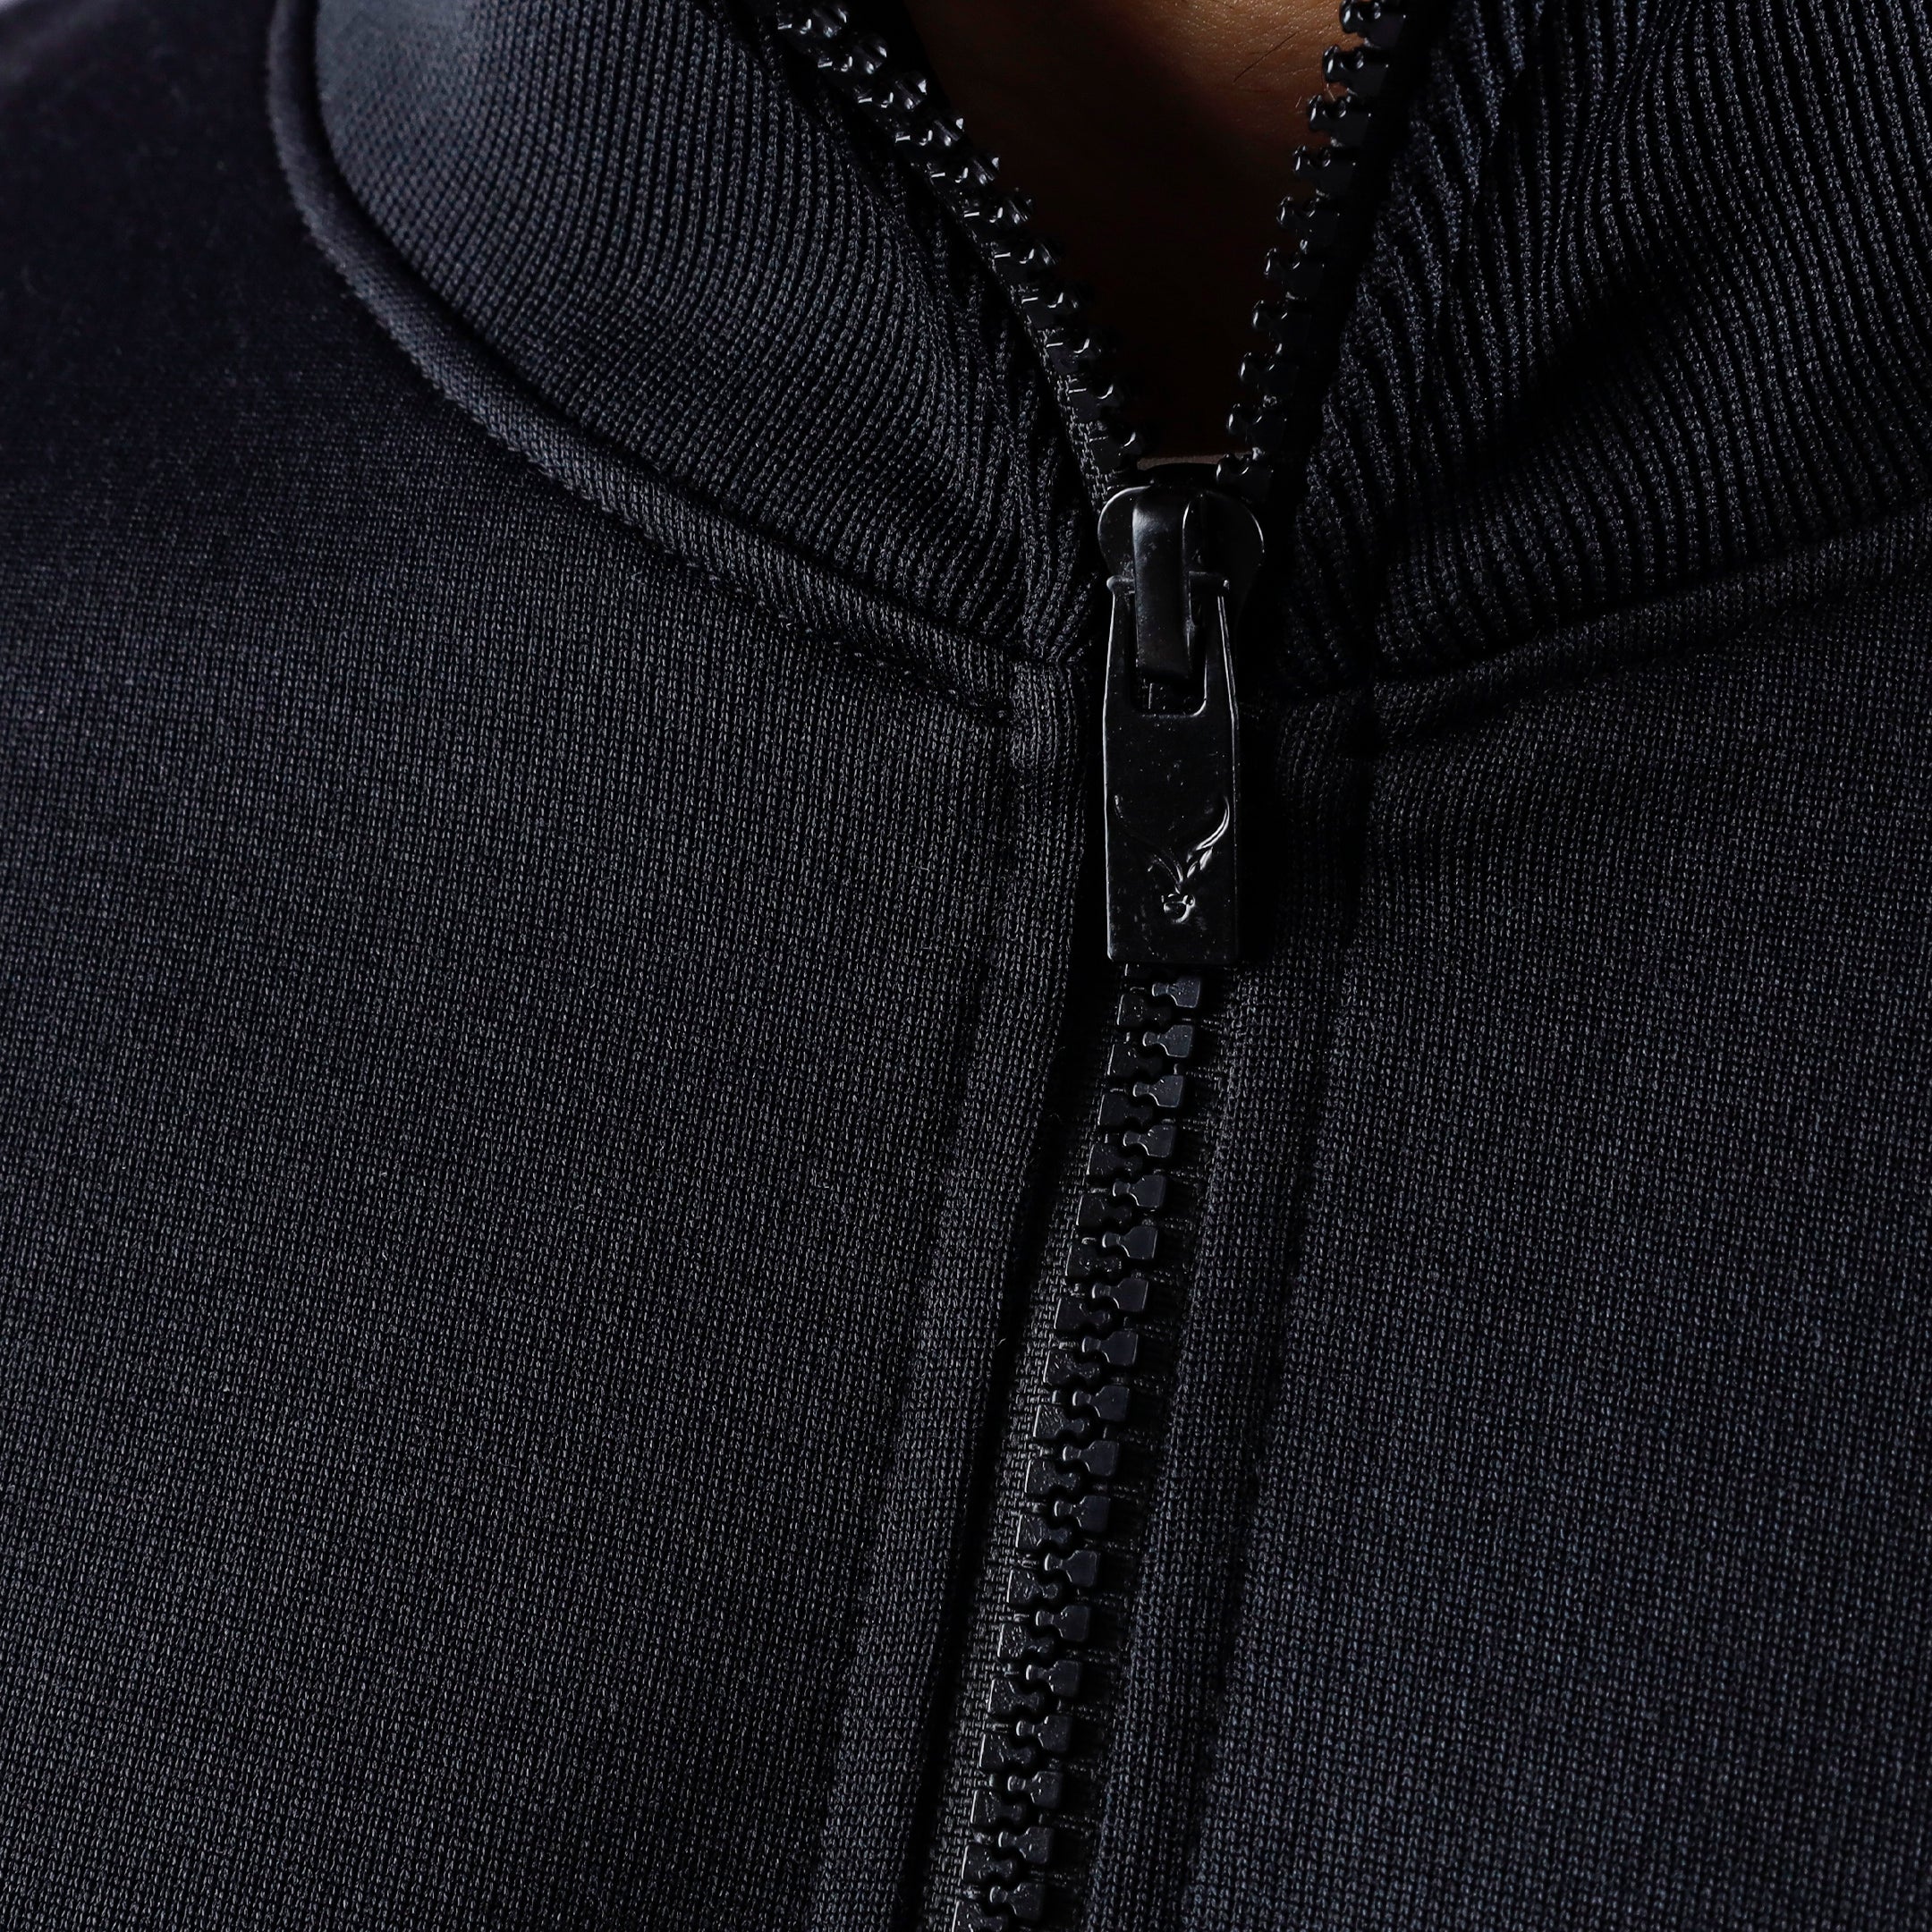 Black Fleece Tracksuit With V-Cut Piping